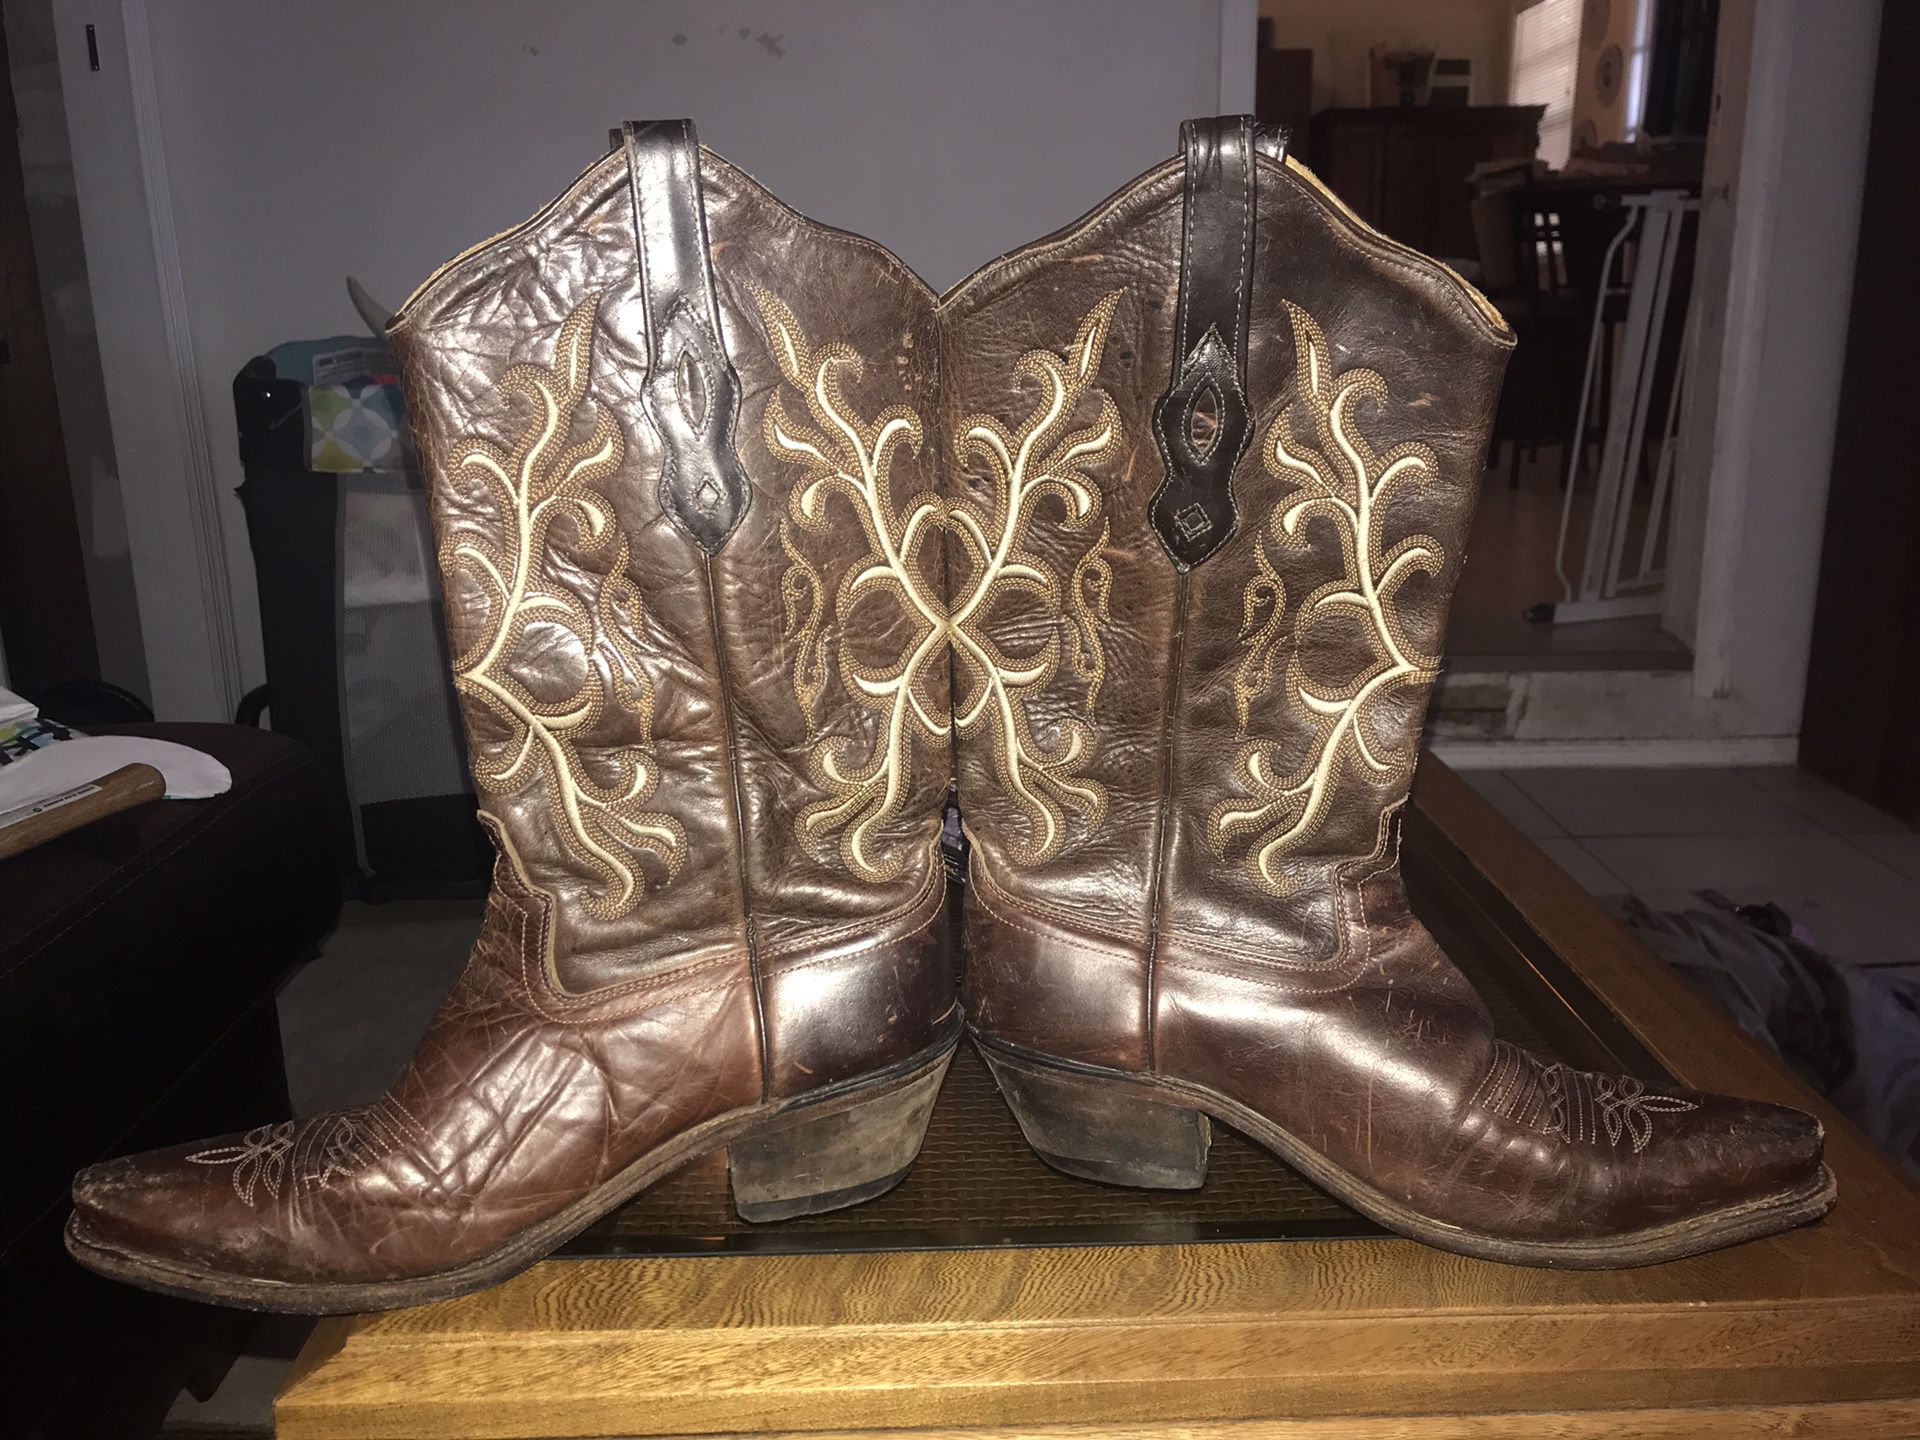 Old West cowboy boots